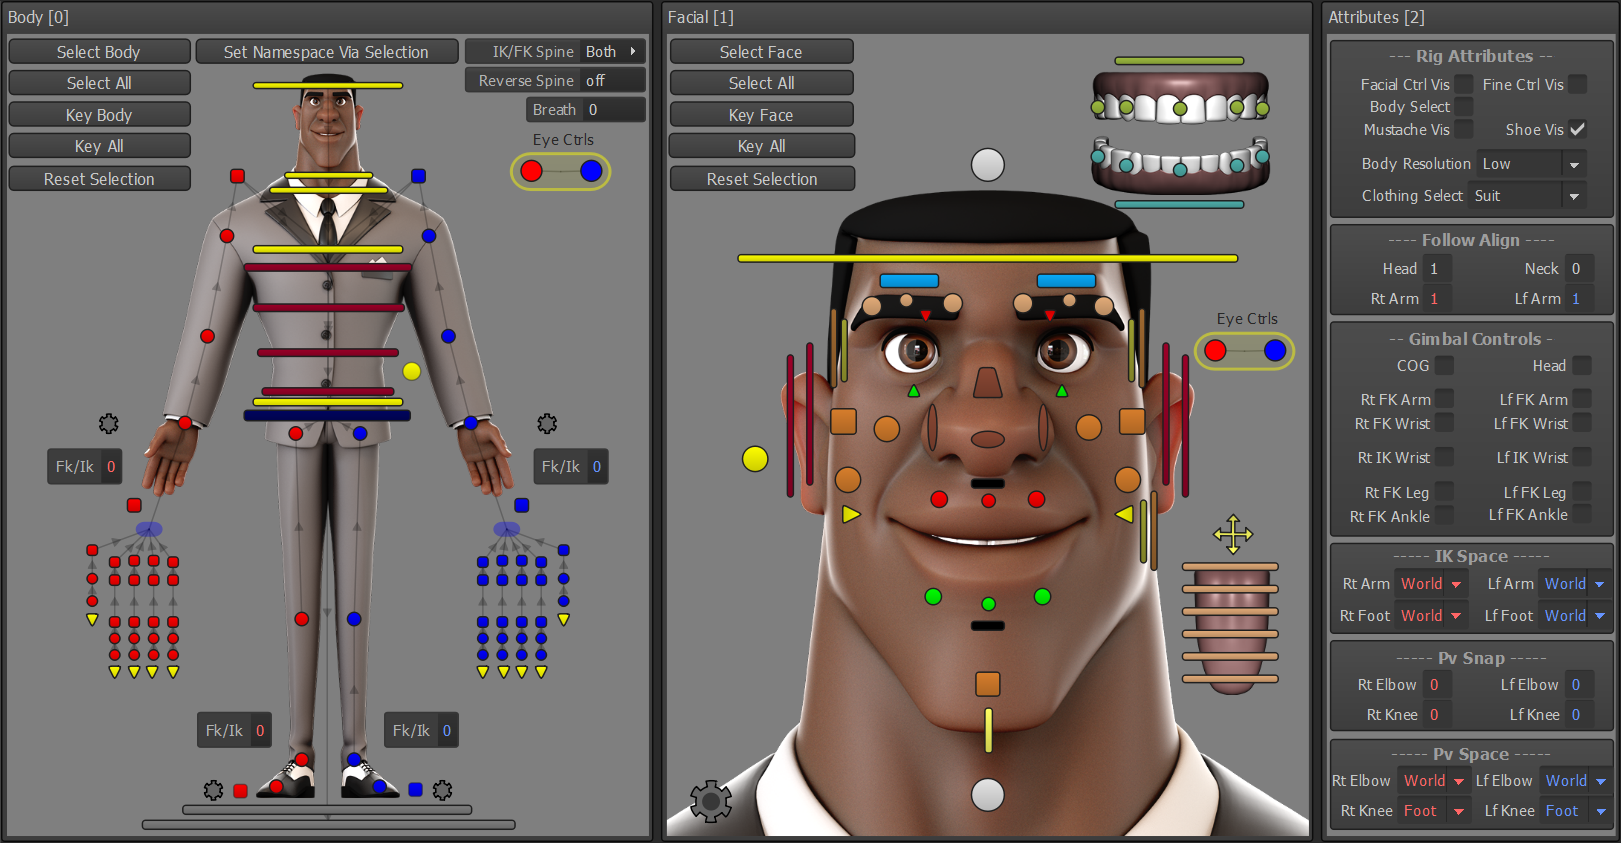 Image of Darius' face with GUI picker options highlighted